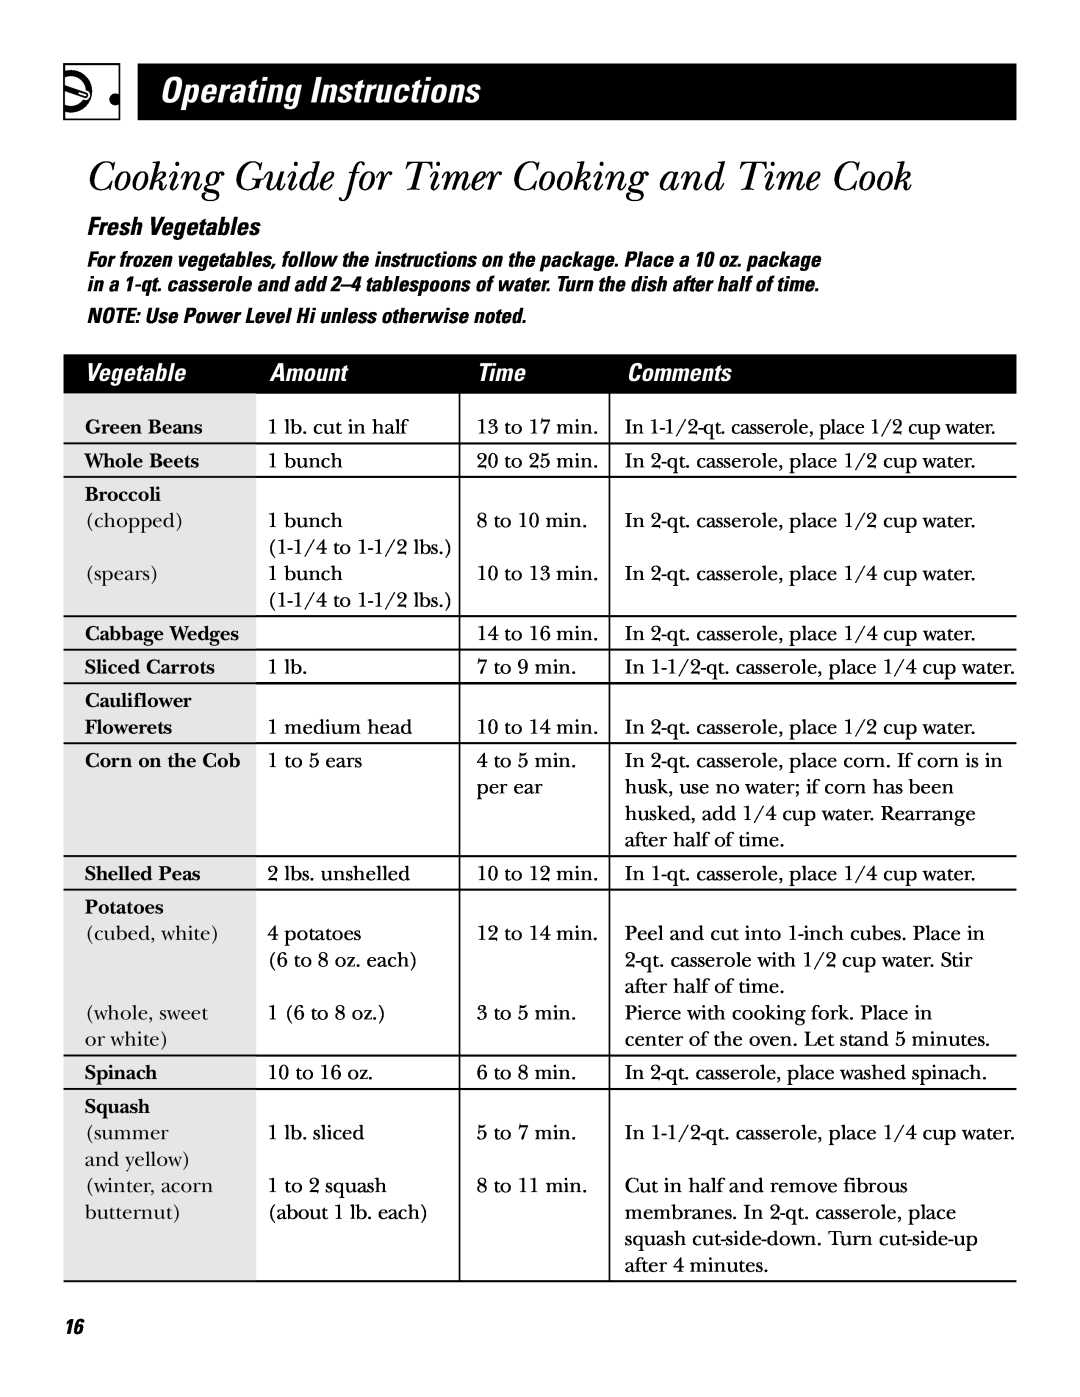 GE JE610, JE620 Cooking Guide for Timer Cooking and Time Cook, Fresh Vegetables, Amount, Comments, Operating Instructions 